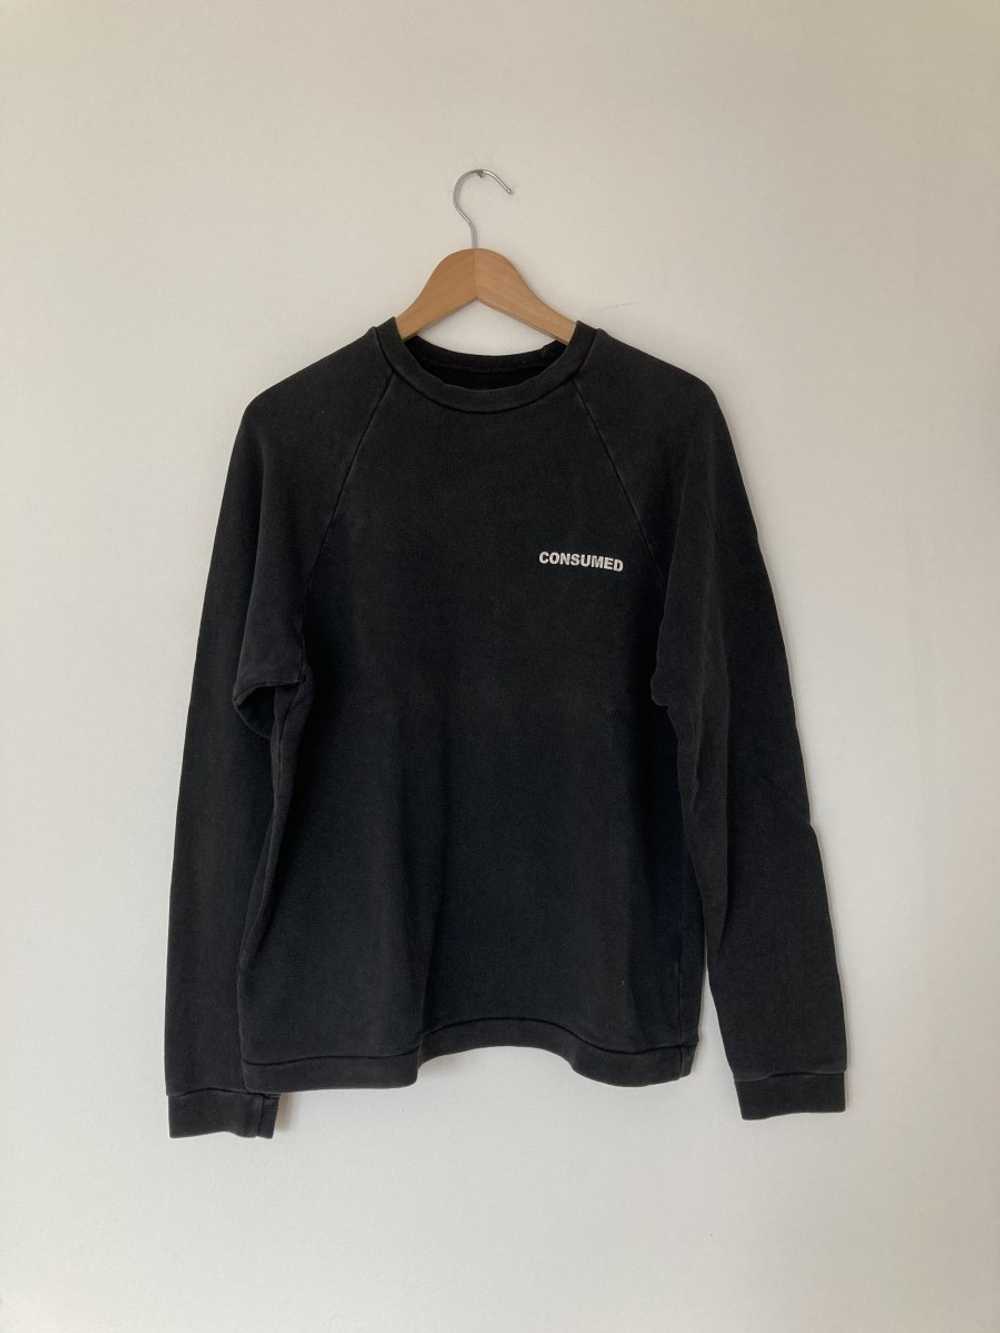 Raf Simons Raf SS03 Consumed "Commodity" sweater - image 2